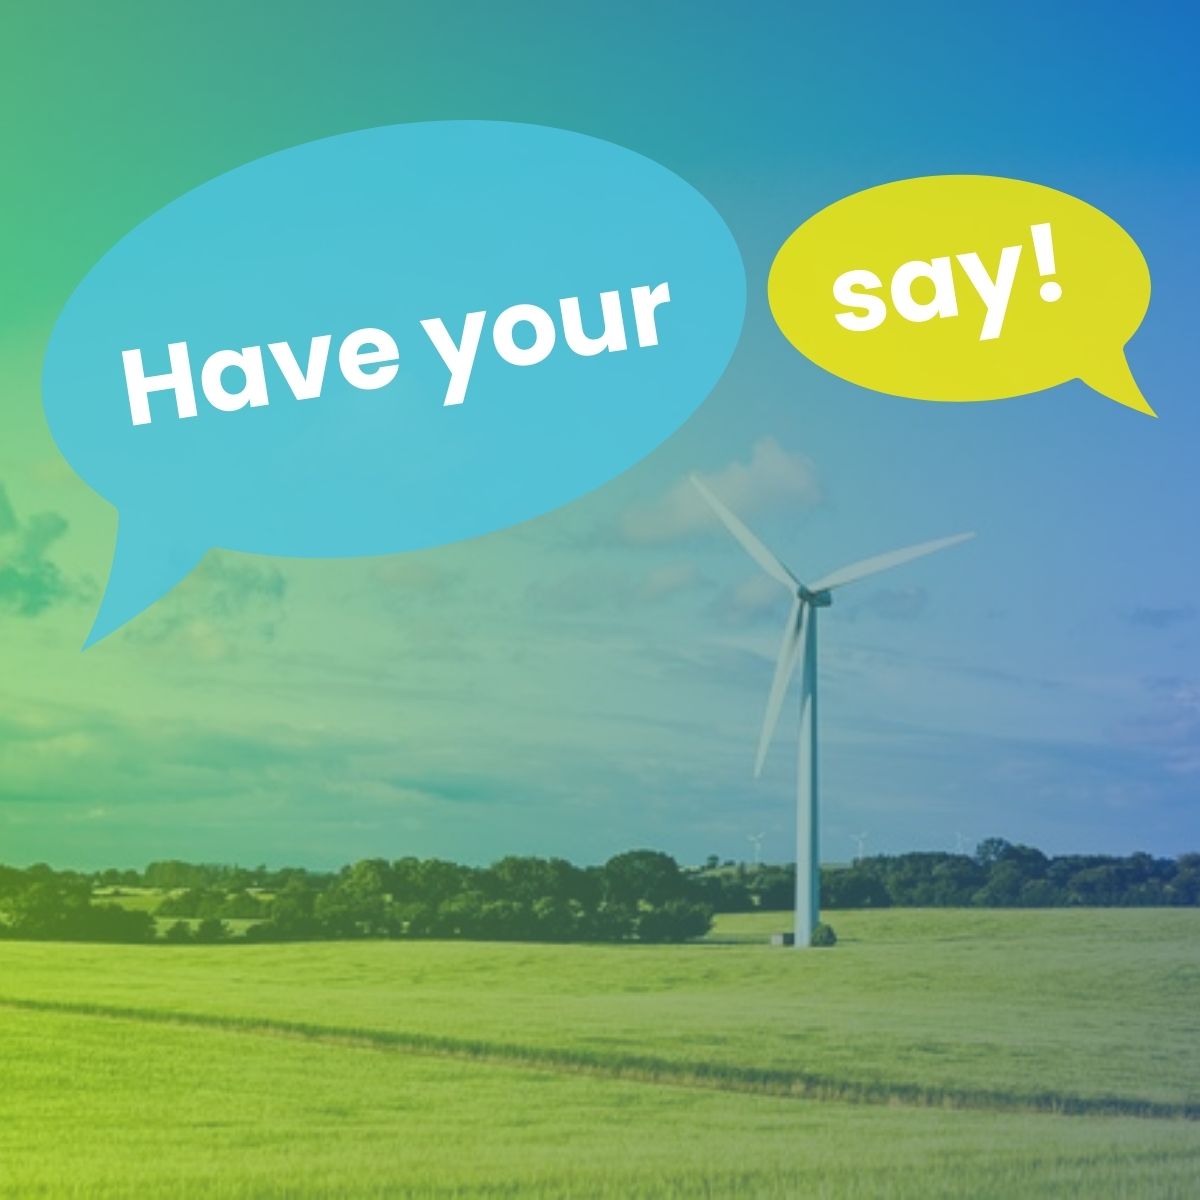 💬🗨Have your say in the European Commission's Survey on Research & Innovation challenges & priorities in the areas #cleanenergy & #mobility & contribute to a reflection paper that will offer input to identify future priorities in these areas for the EU🇪🇺👇tinyurl.com/3tjhhz25